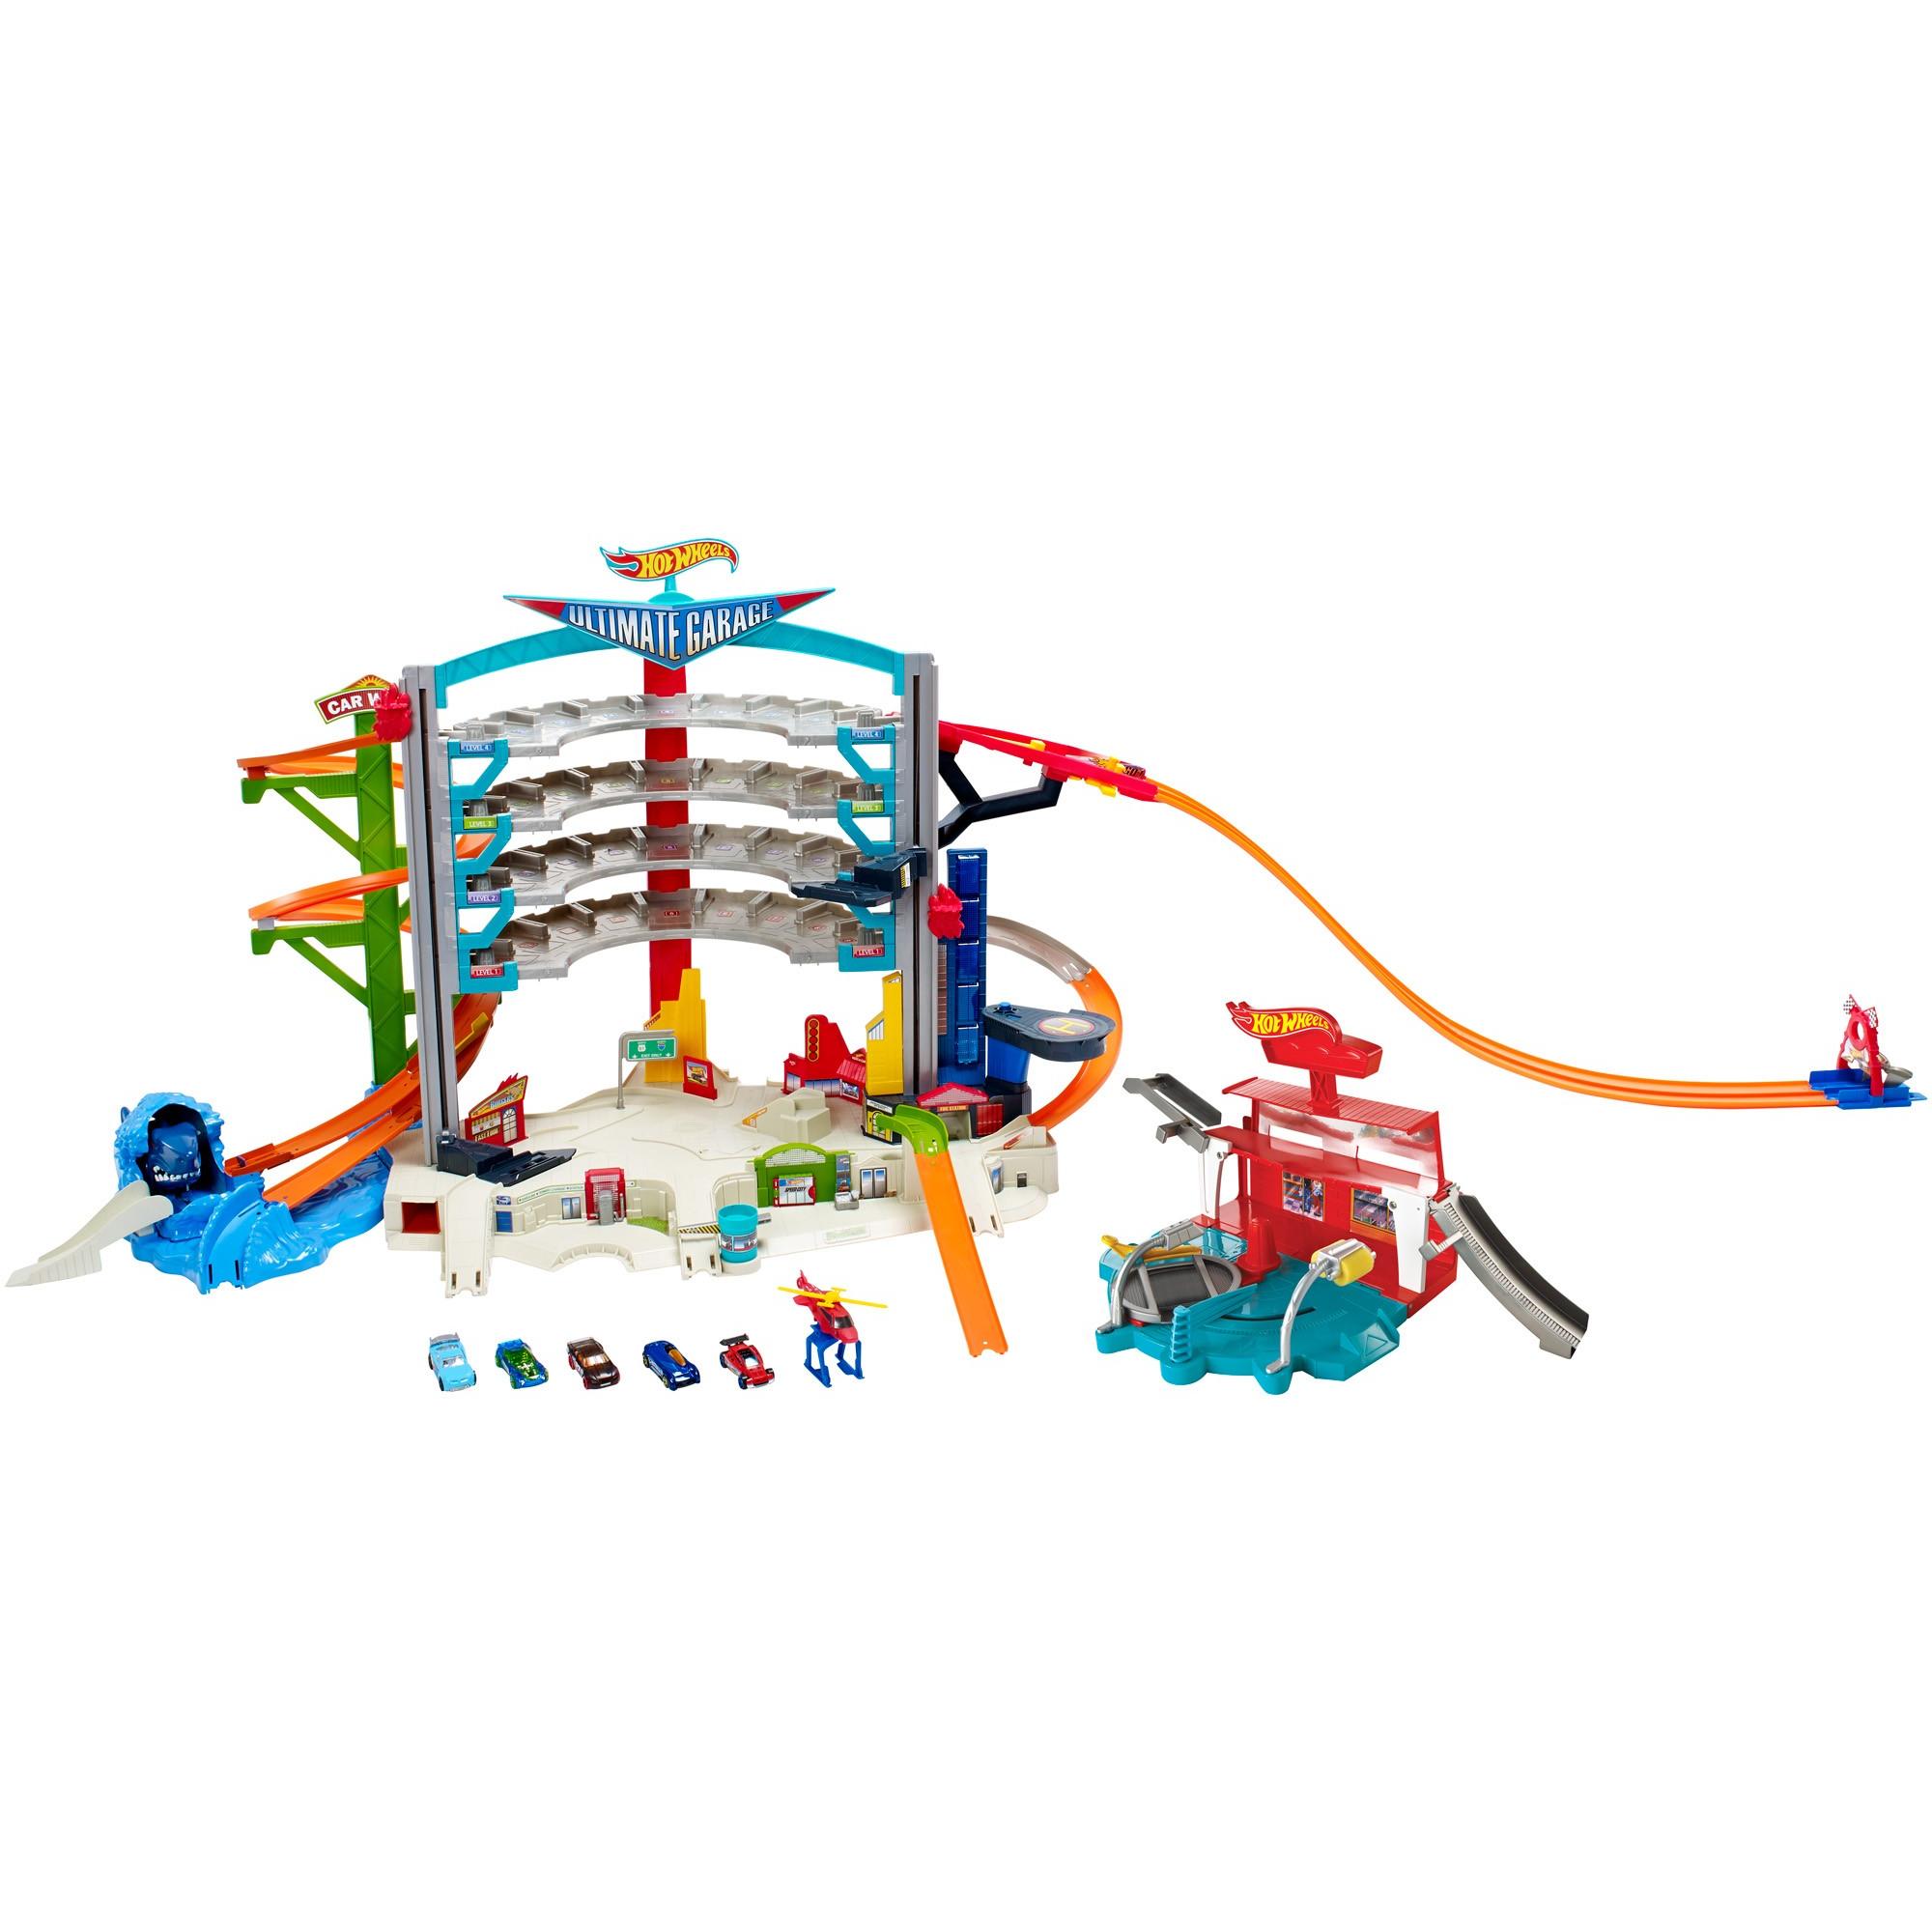 Hot Wheels DRB25 Ultimate Garage Playset With Car Wash - image 3 of 3